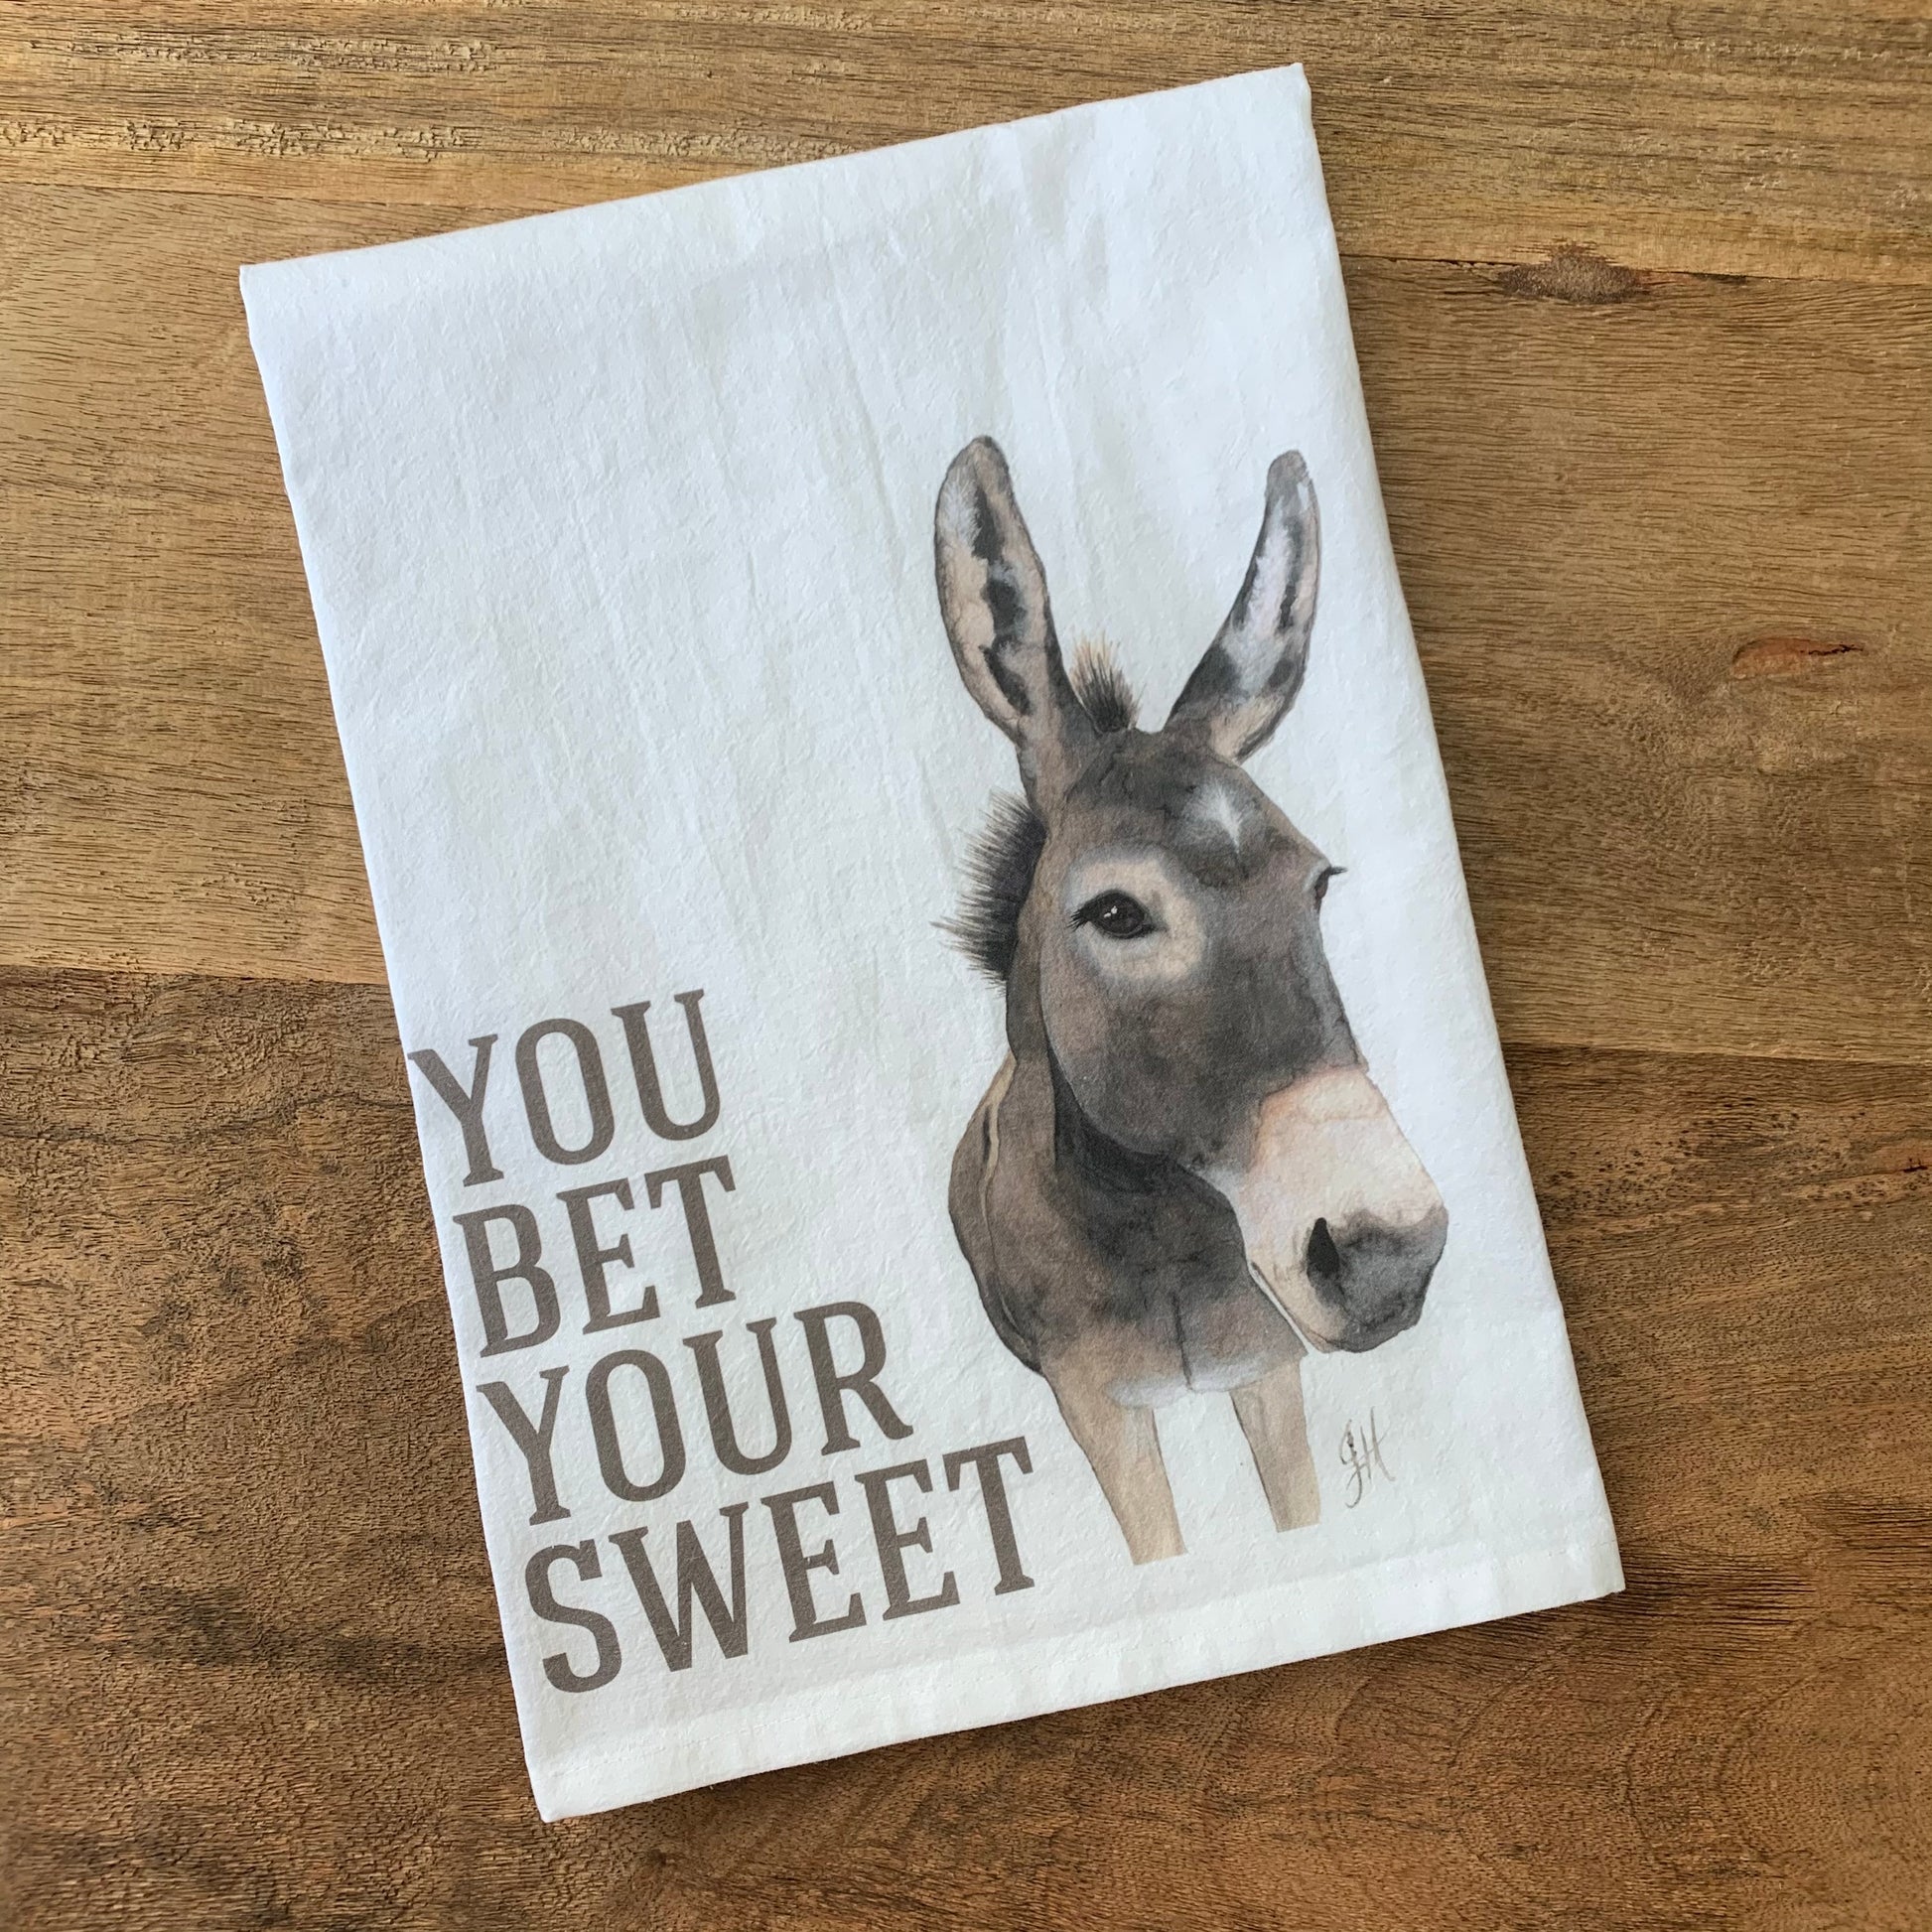 white flour sack towel with a painting of a donkey and text on a wood background